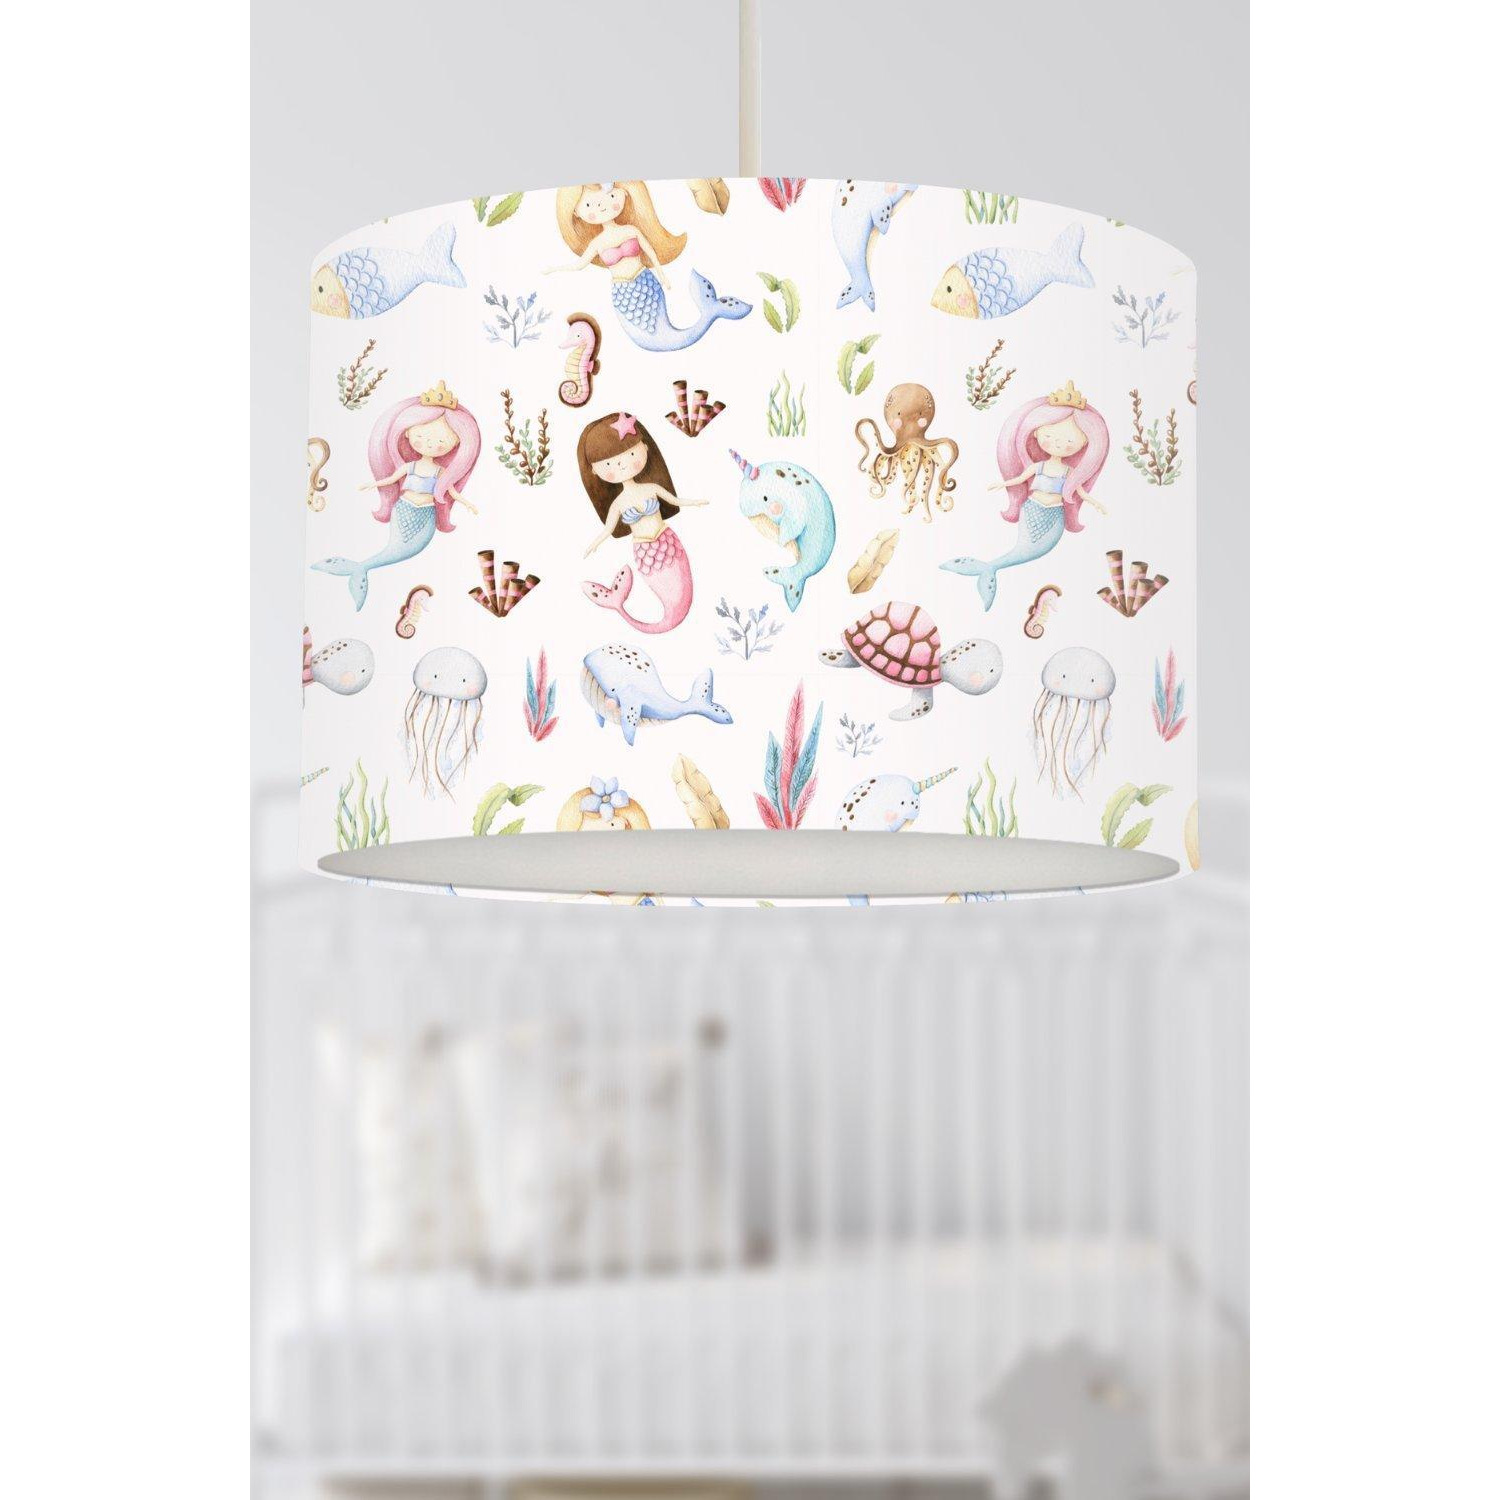 Mermaids and Friends Lampshade White - image 1